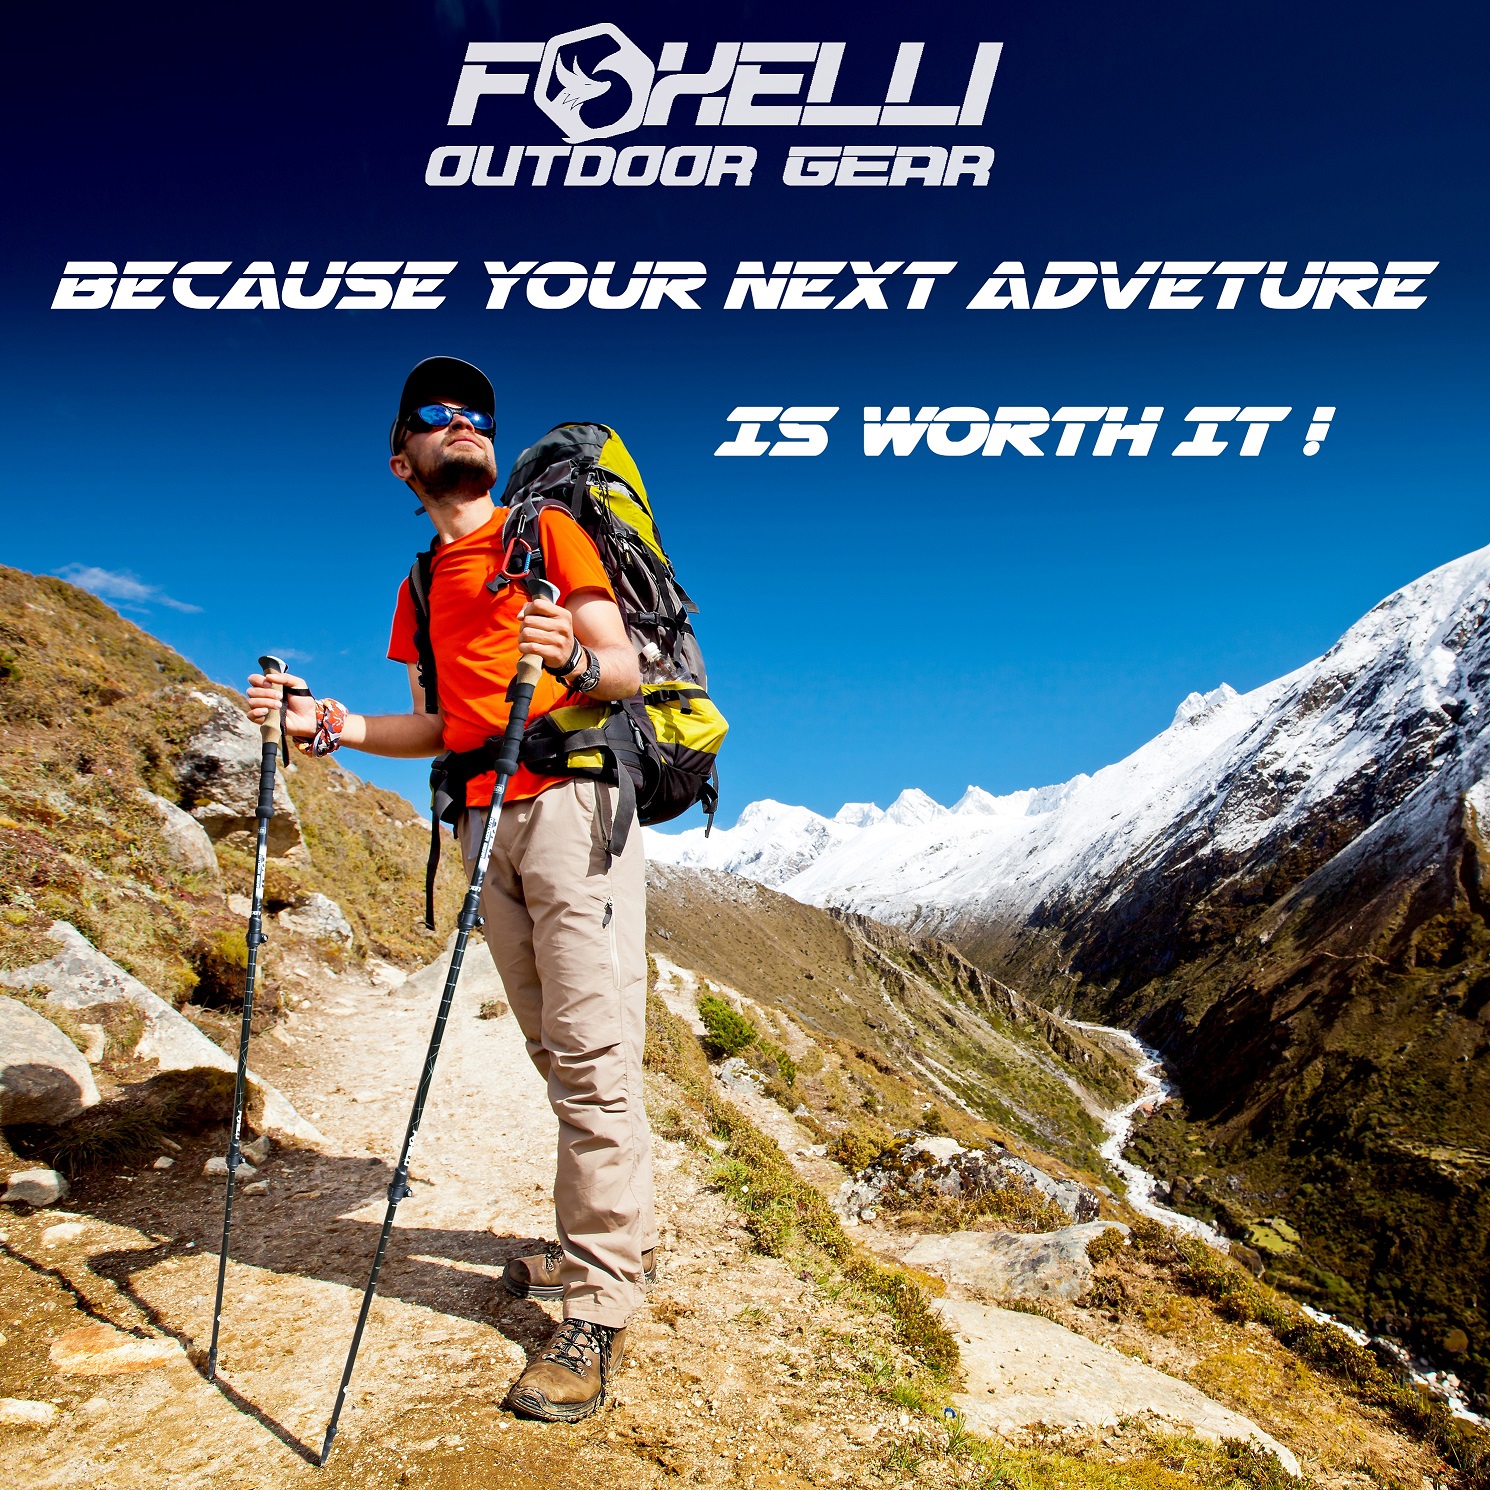 Your adventure is worth it!